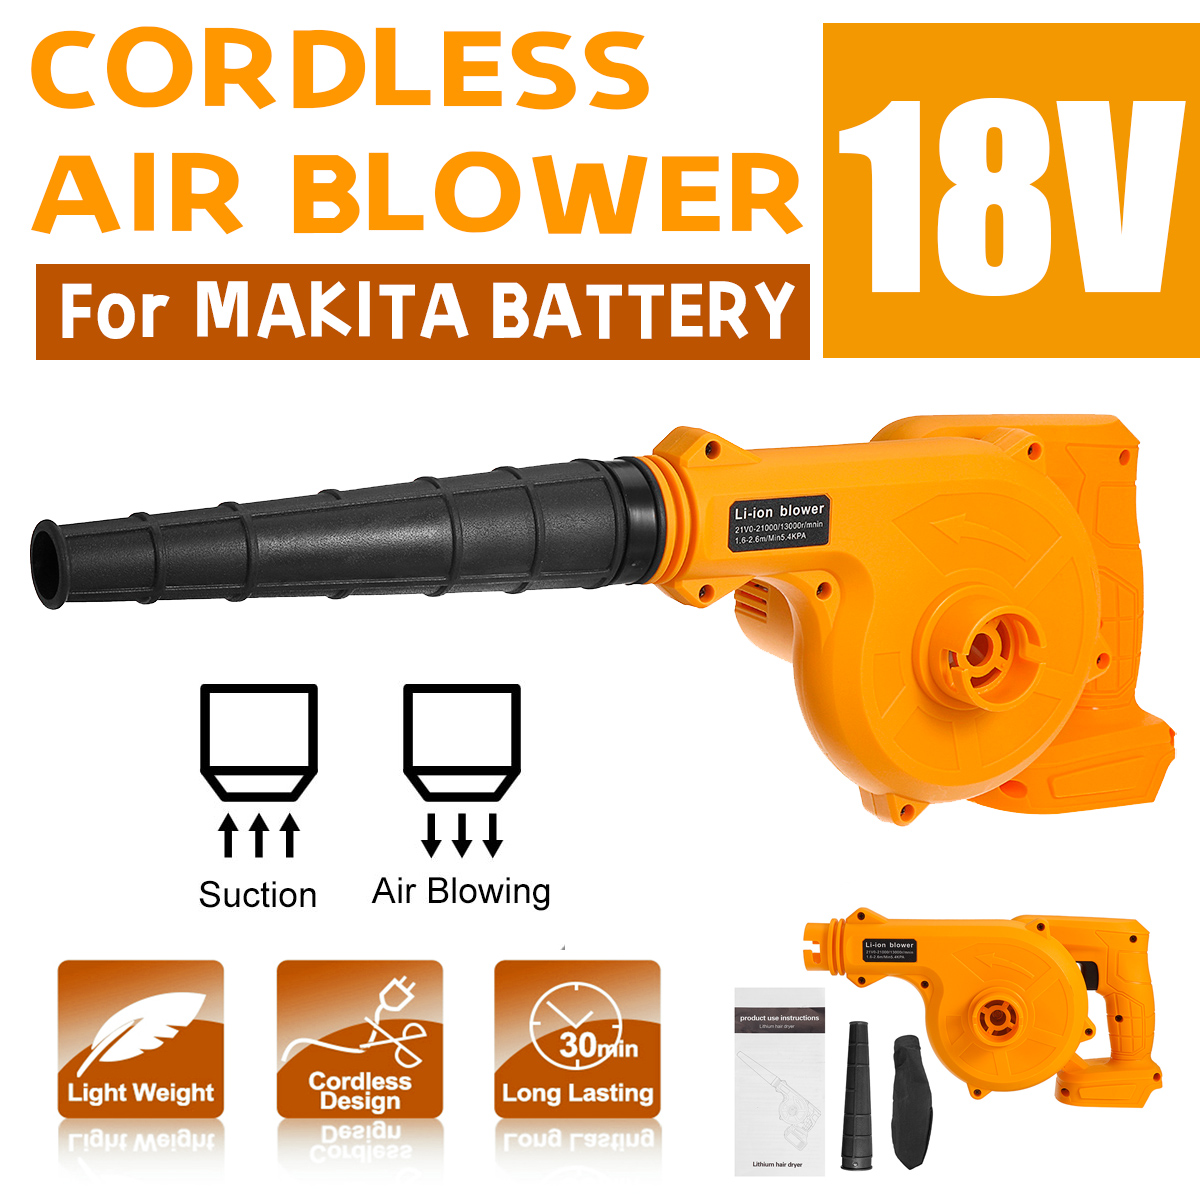 2-in-1-Cordless-Electric-Air-Blower--Suction-Dust-Remover-Leaf-Cleaner-for-Makita-18V-Battery-1856709-2